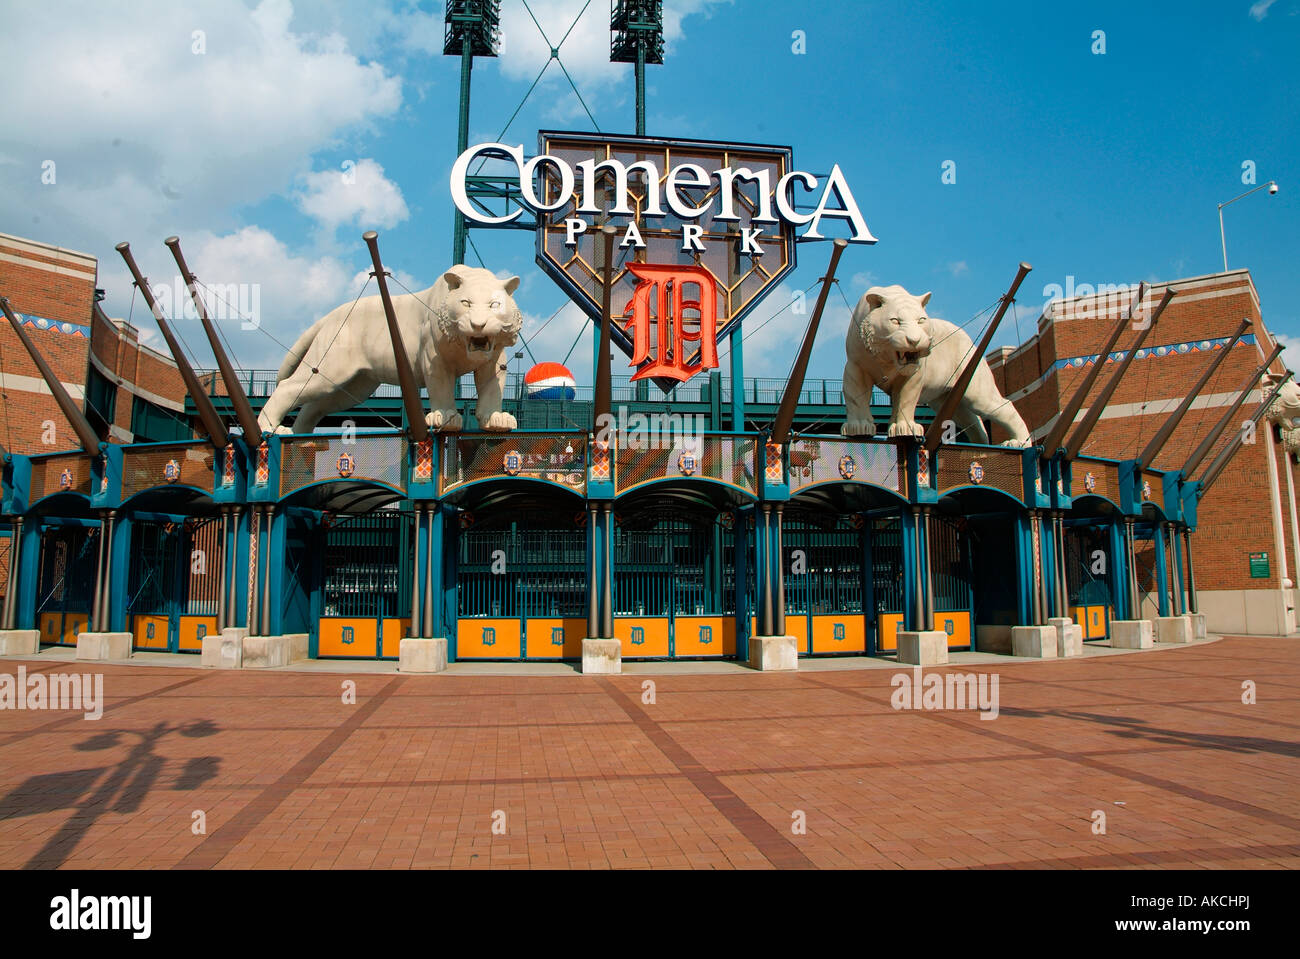 Comerica Park, home of the Detroit Tigers baseball team. Location: downtown Detroit, Michigan Stock Photo